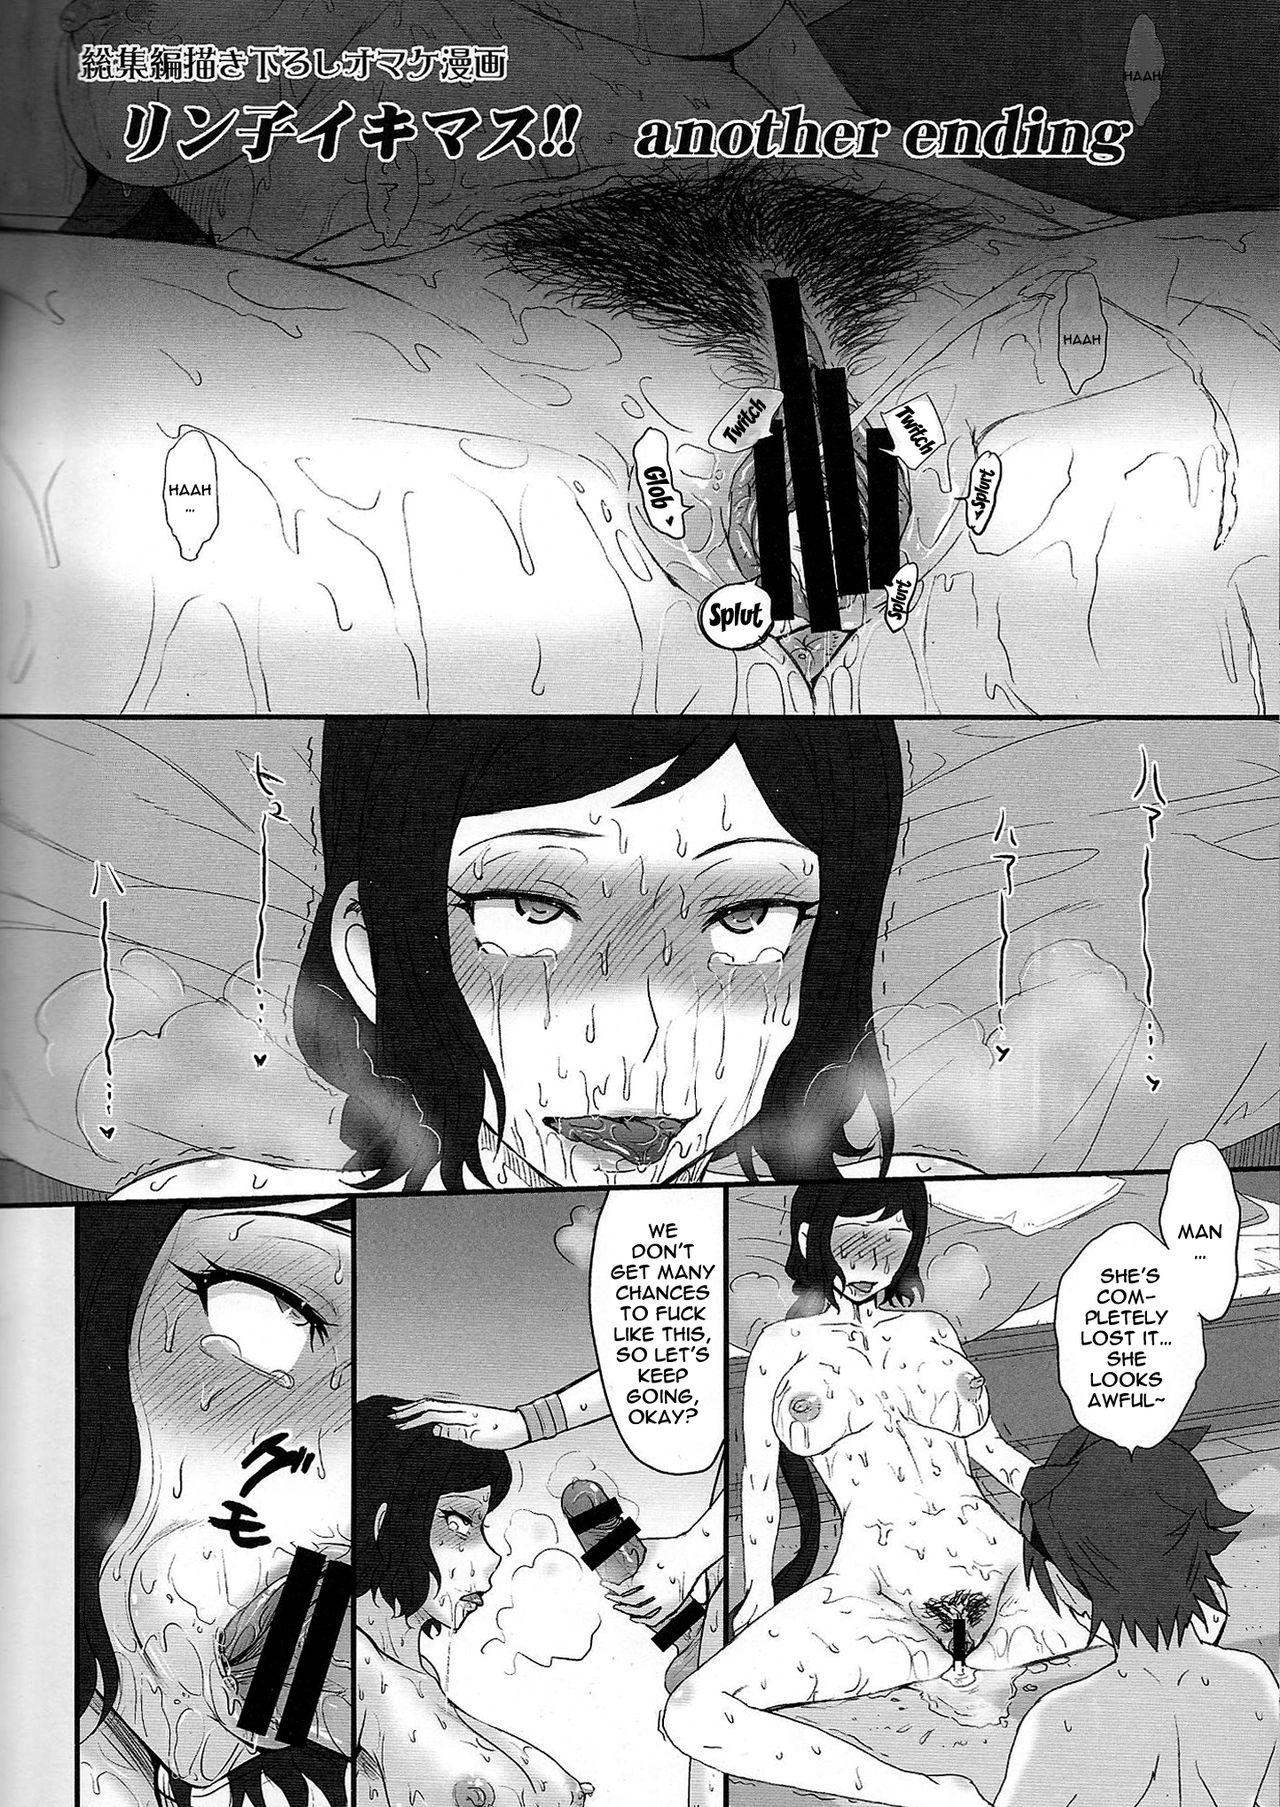 Assfucked Rinko Ikimasu - Another Ending - Gundam build fighters Family Sex - Page 2